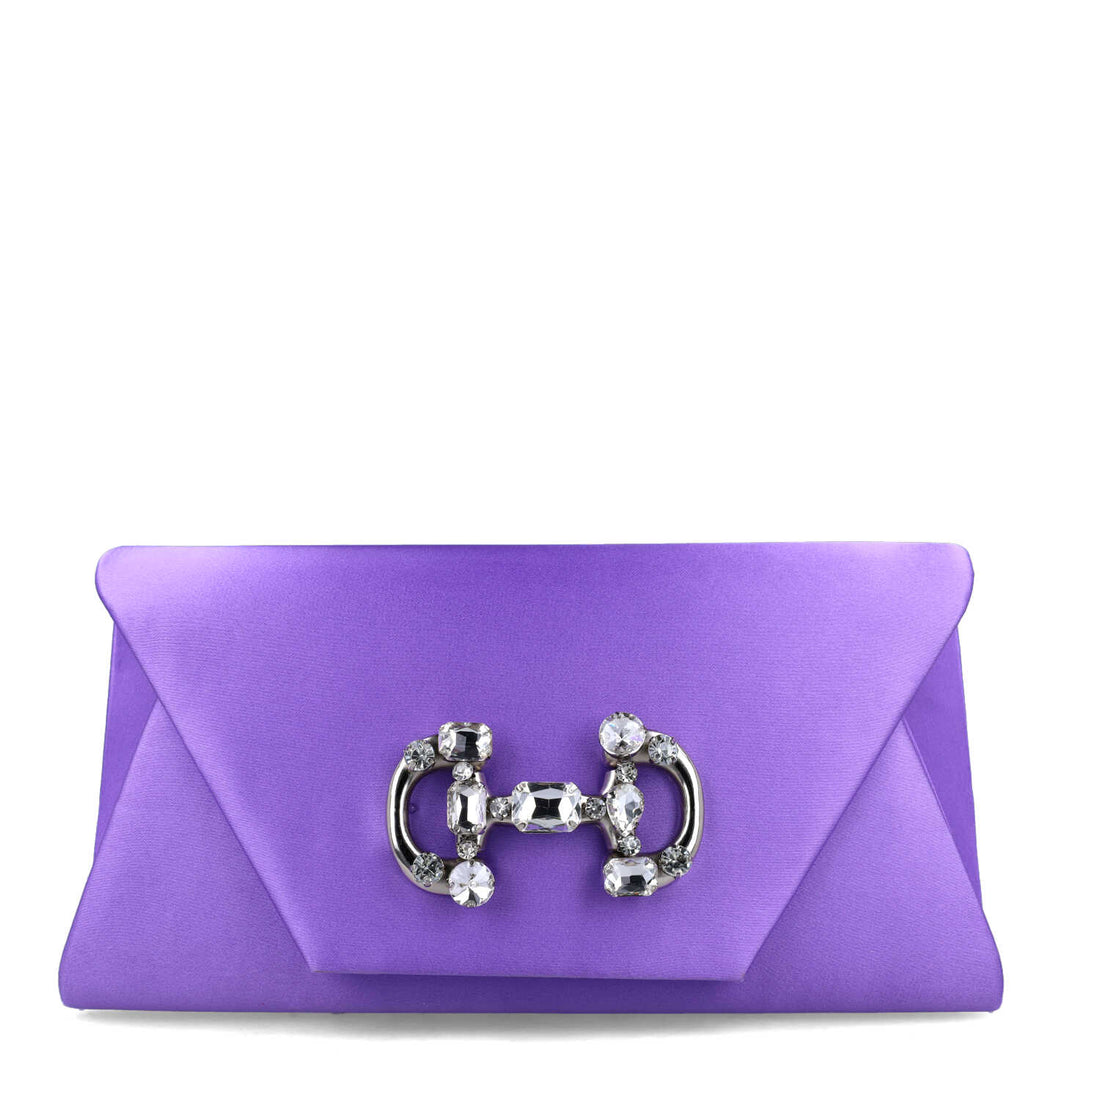 Orchid Evening Bag